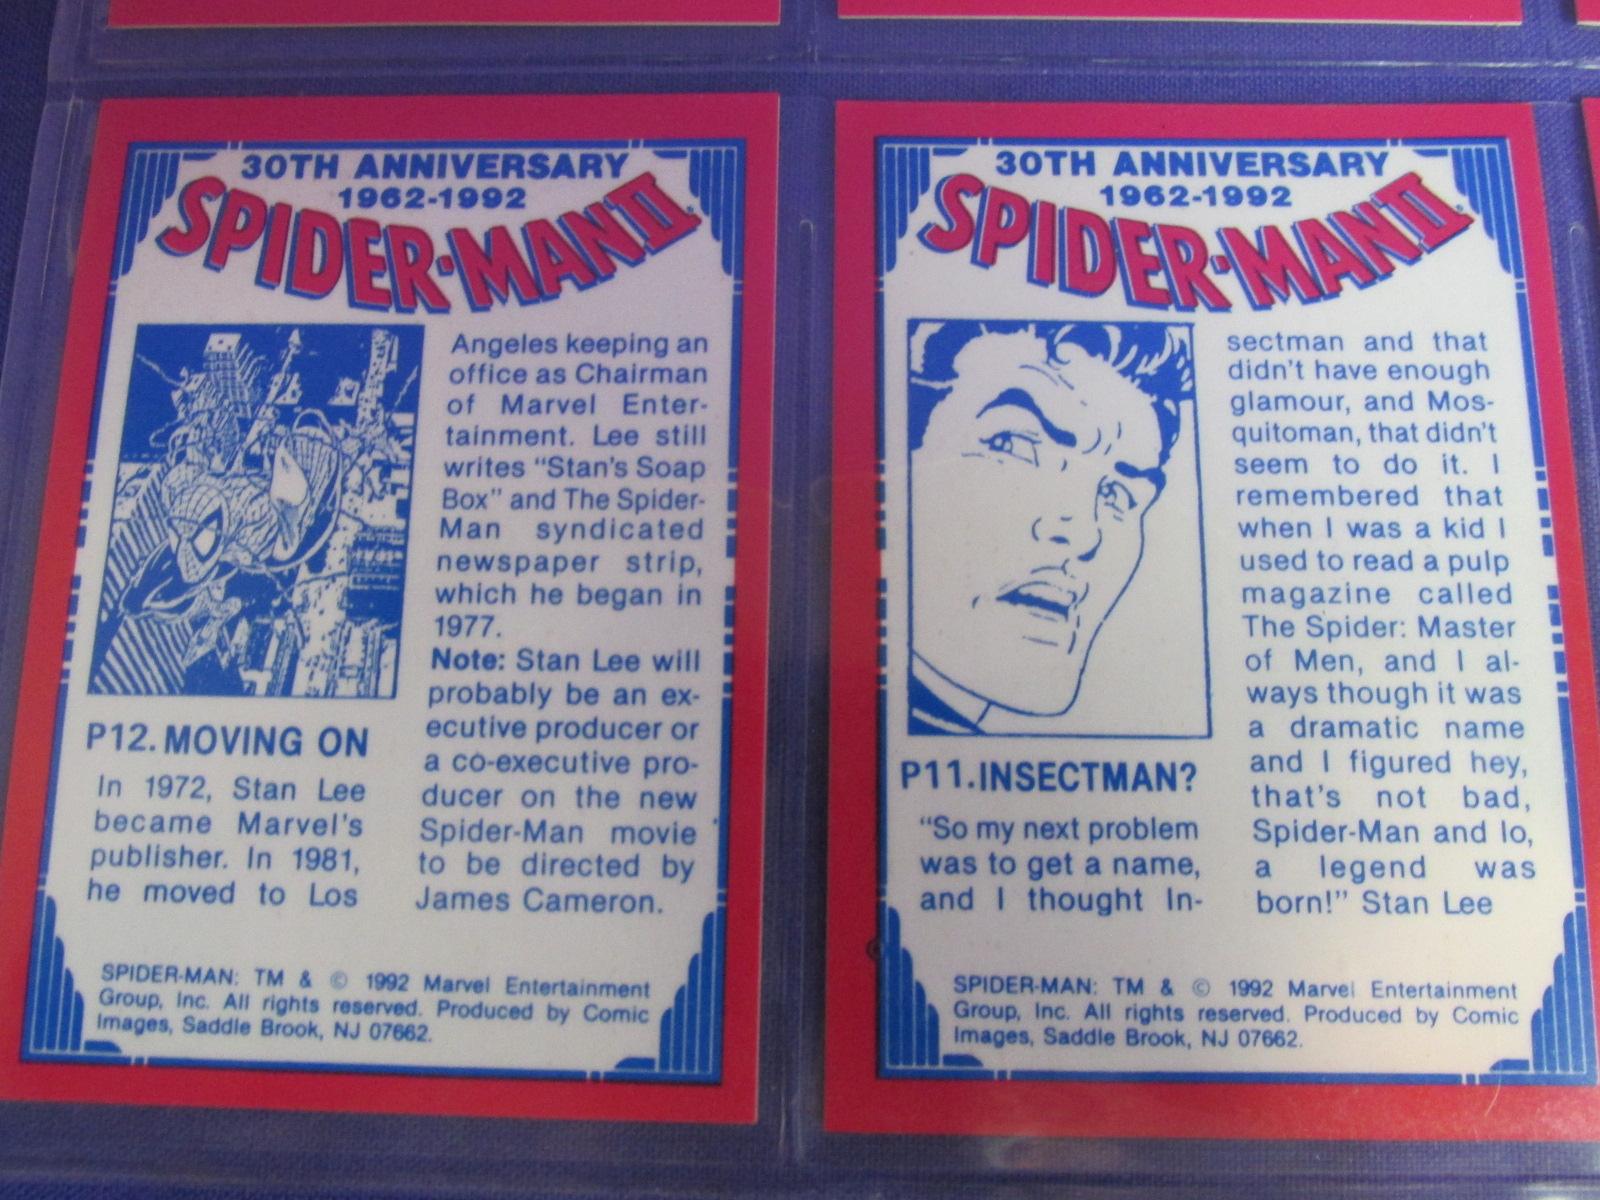 Lot of 6, “30th Anniversary” SPIDERMAN cards